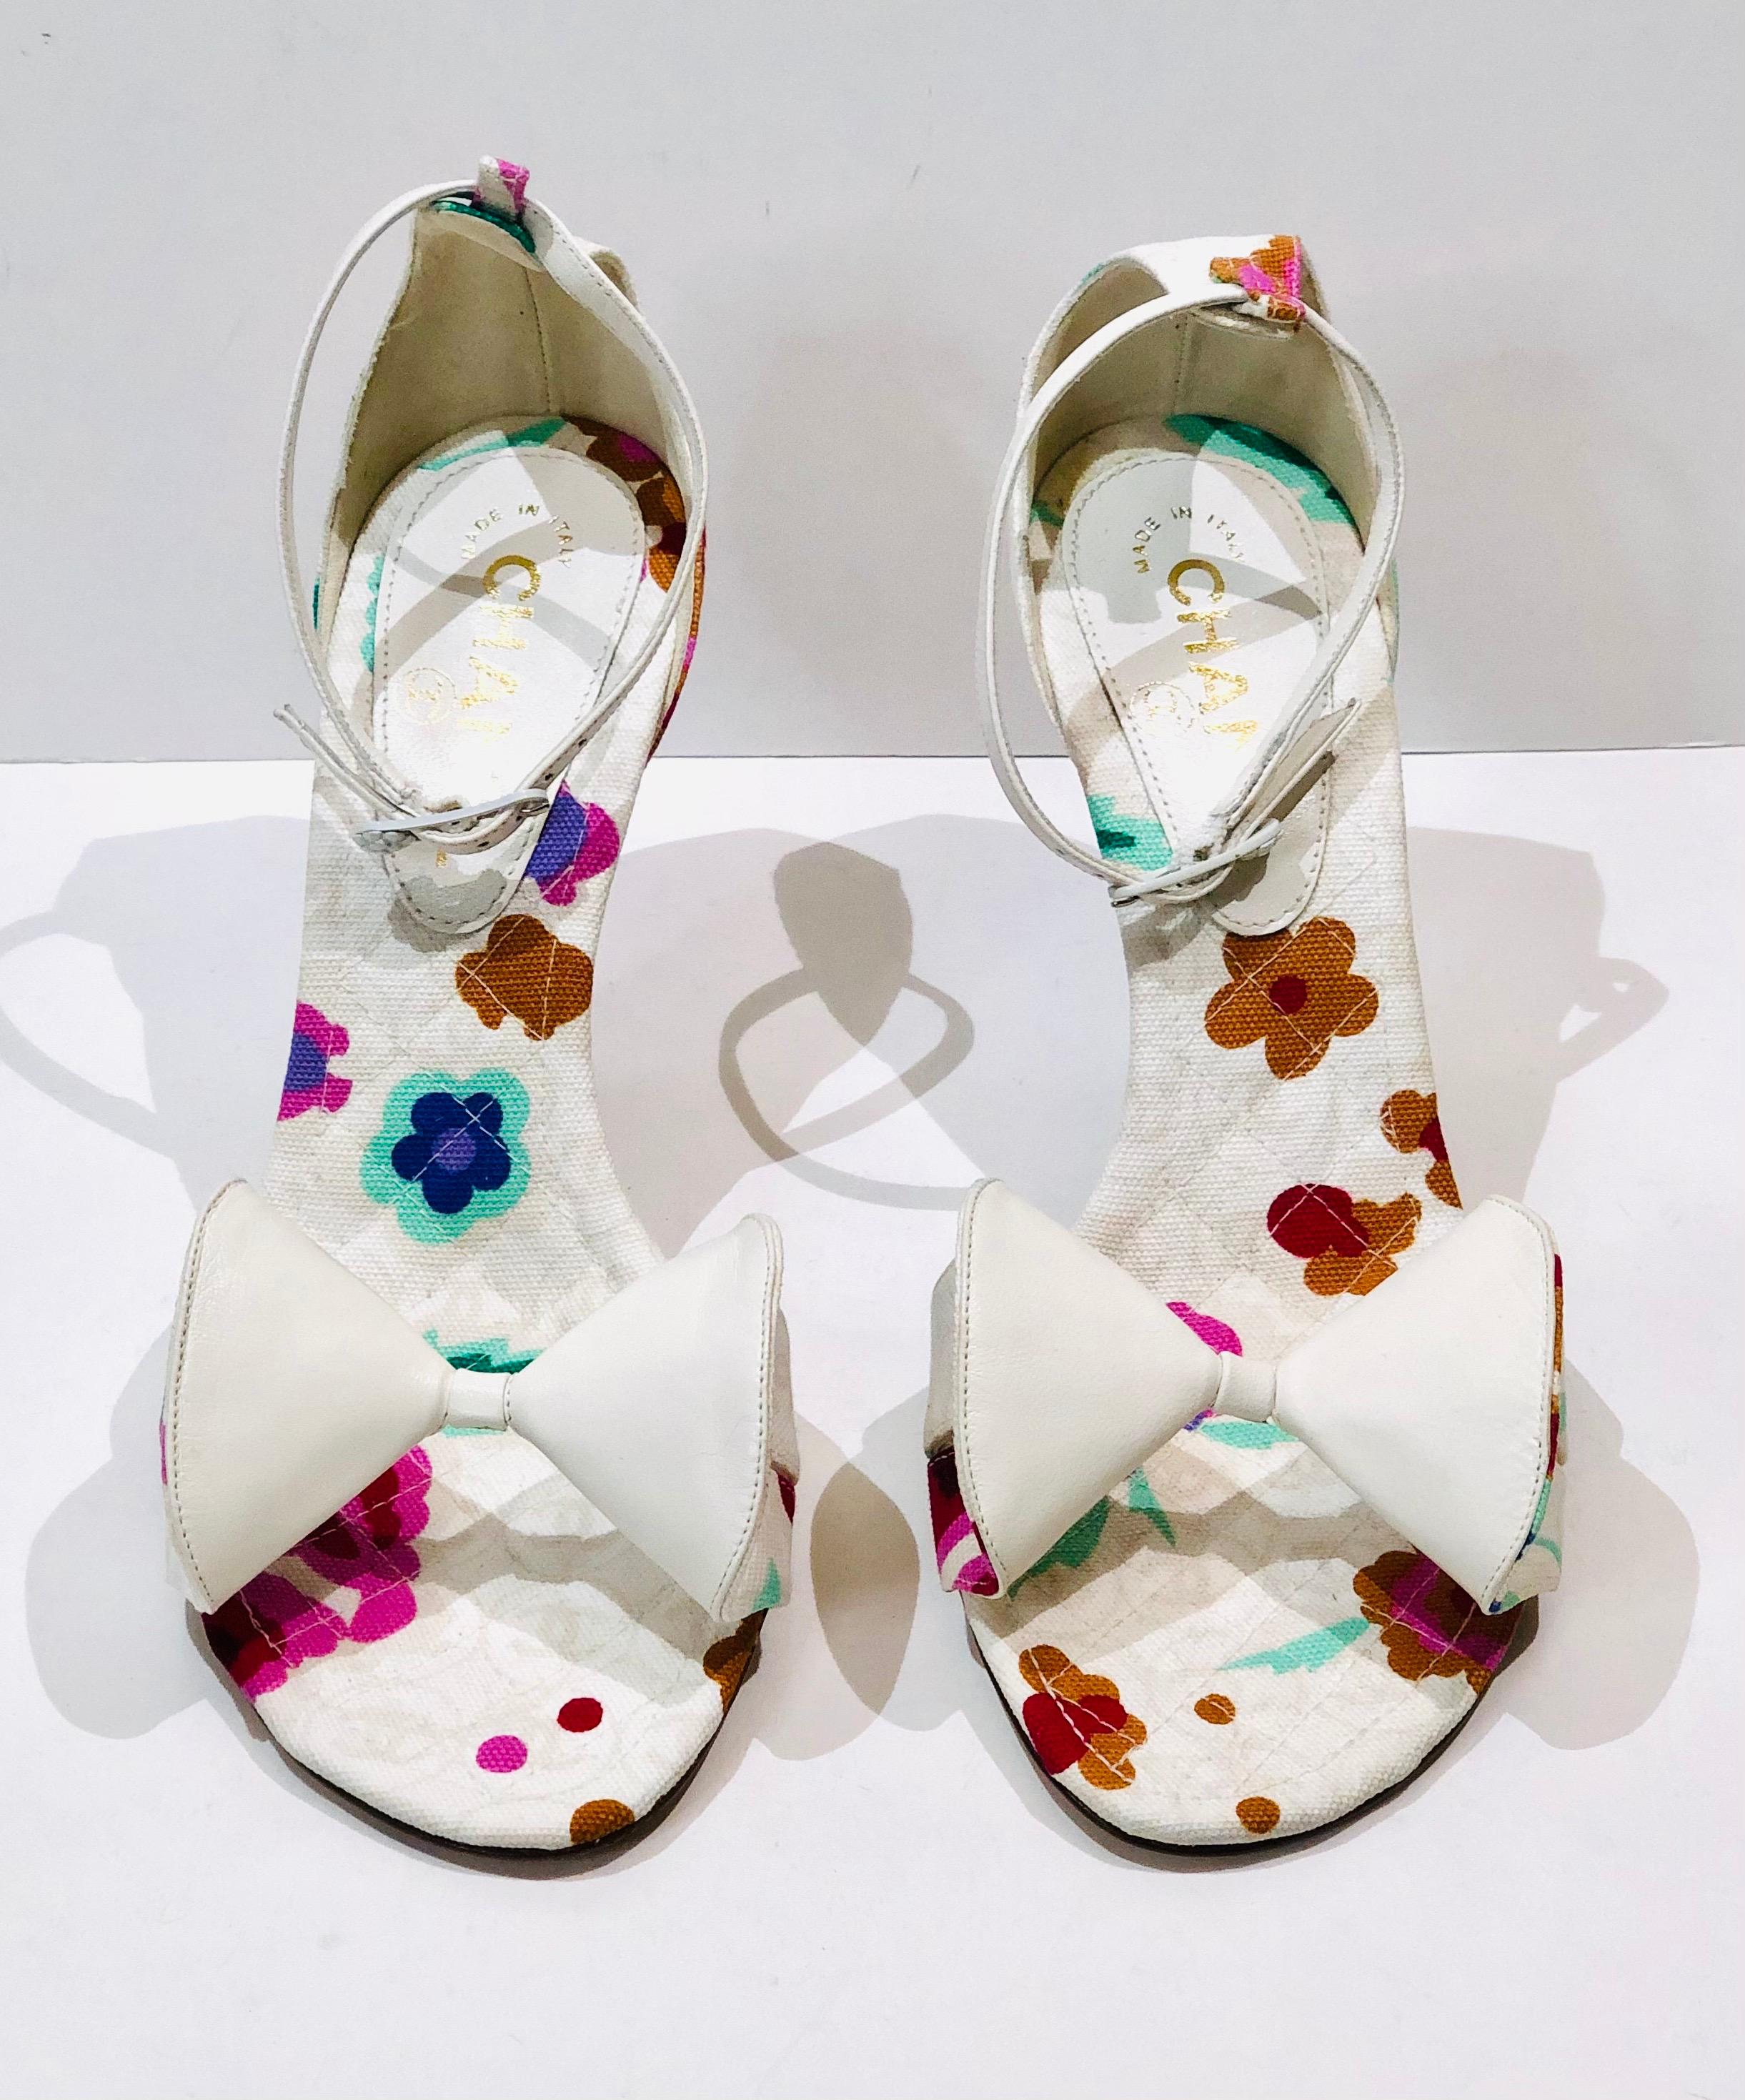 - Chanel white canvas floral print strap sandals in heels. 

- Leather white bows in front. 

- Flower hardware leather strap. 

- Size 38. 